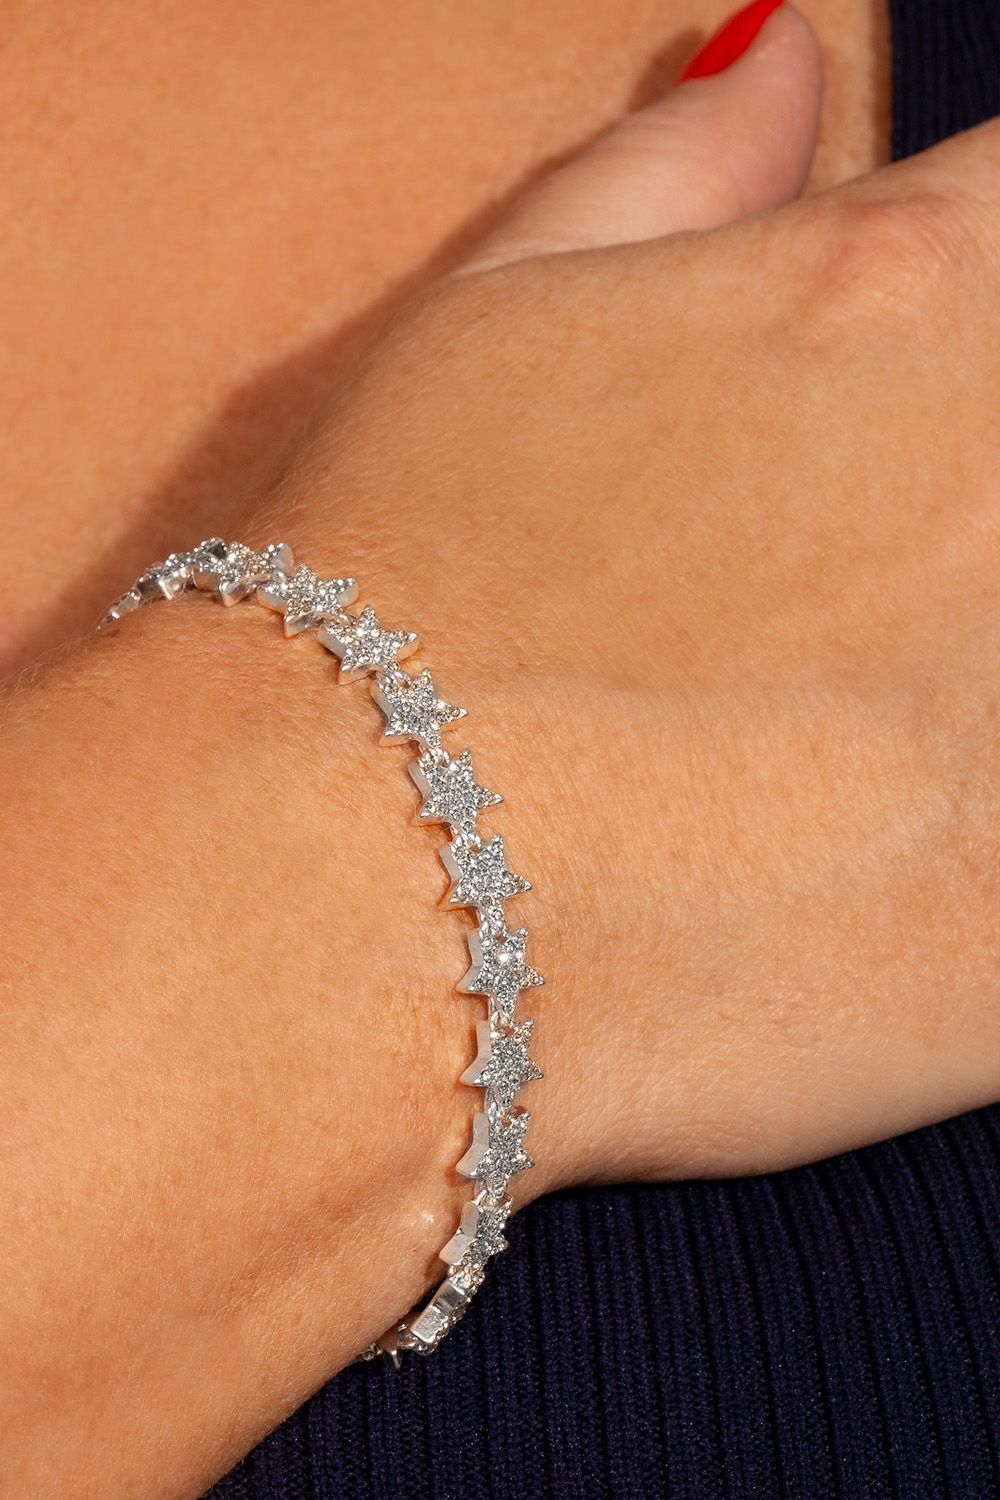 The Kate Thorton Sparkling Stars bracelet looks stunning with a day time chunky knit look on its own, and you can really bring the glamour by teaming it up with the matching necklace and earrings too. The tennis style bracelet is silver plated and adorned with pave clear stones across every star, and it comes with an extender too. A classic look with a cool twist, fans of sparkle and celestial jewellery will love this piece!